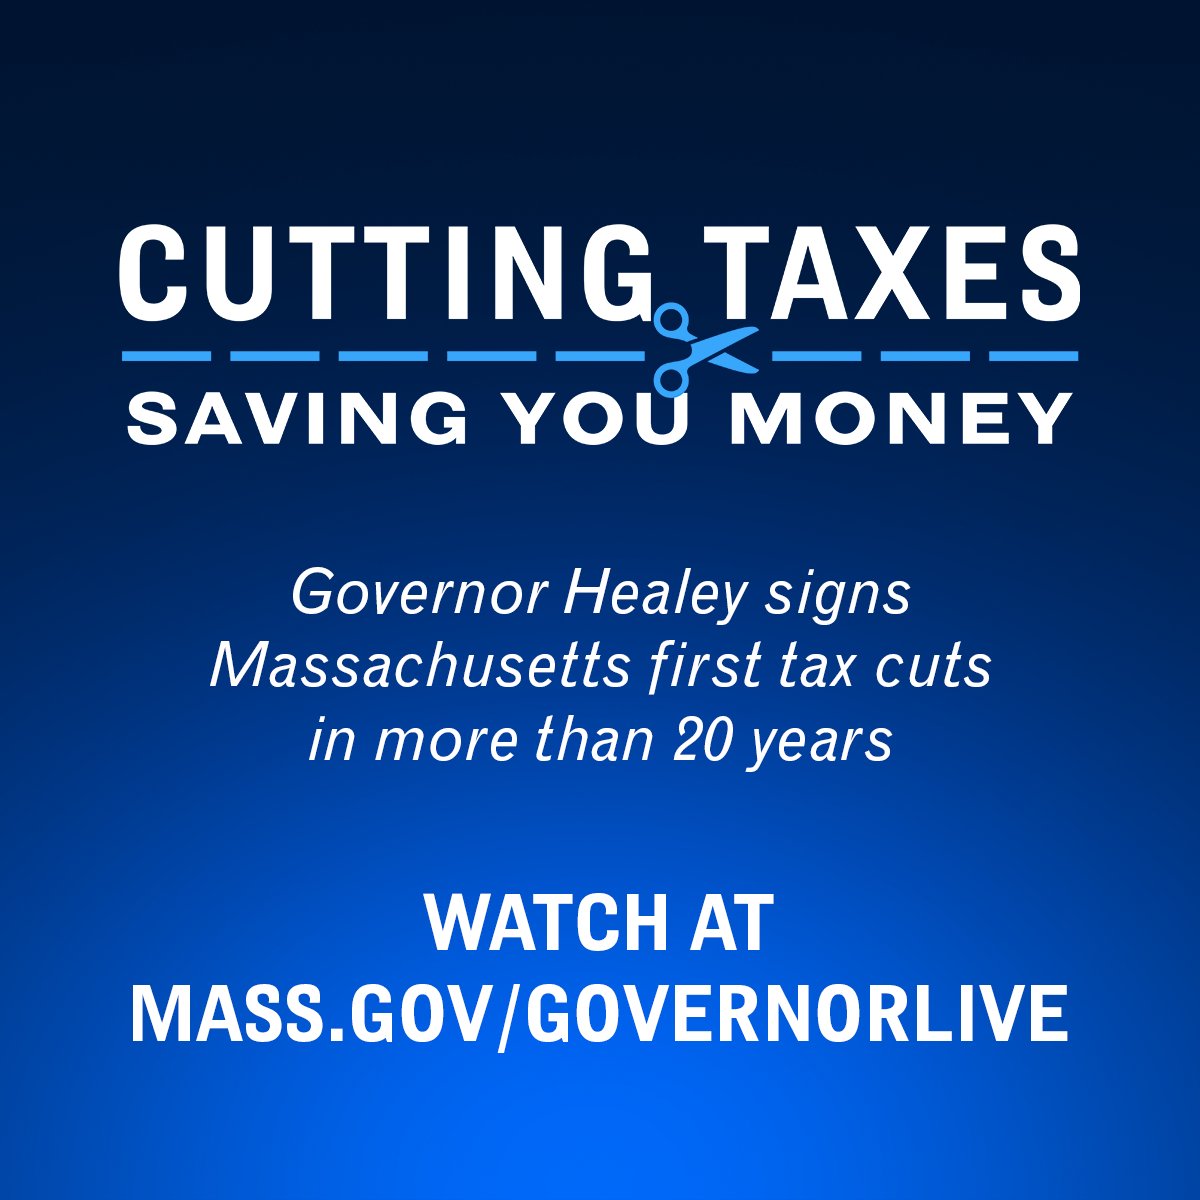 It’s been 20 years since Massachusetts cut taxes. That ends today. Soon, I’ll sign real relief for families, seniors, renters, and more into law. Join us at mass.gov/GovernorLive.